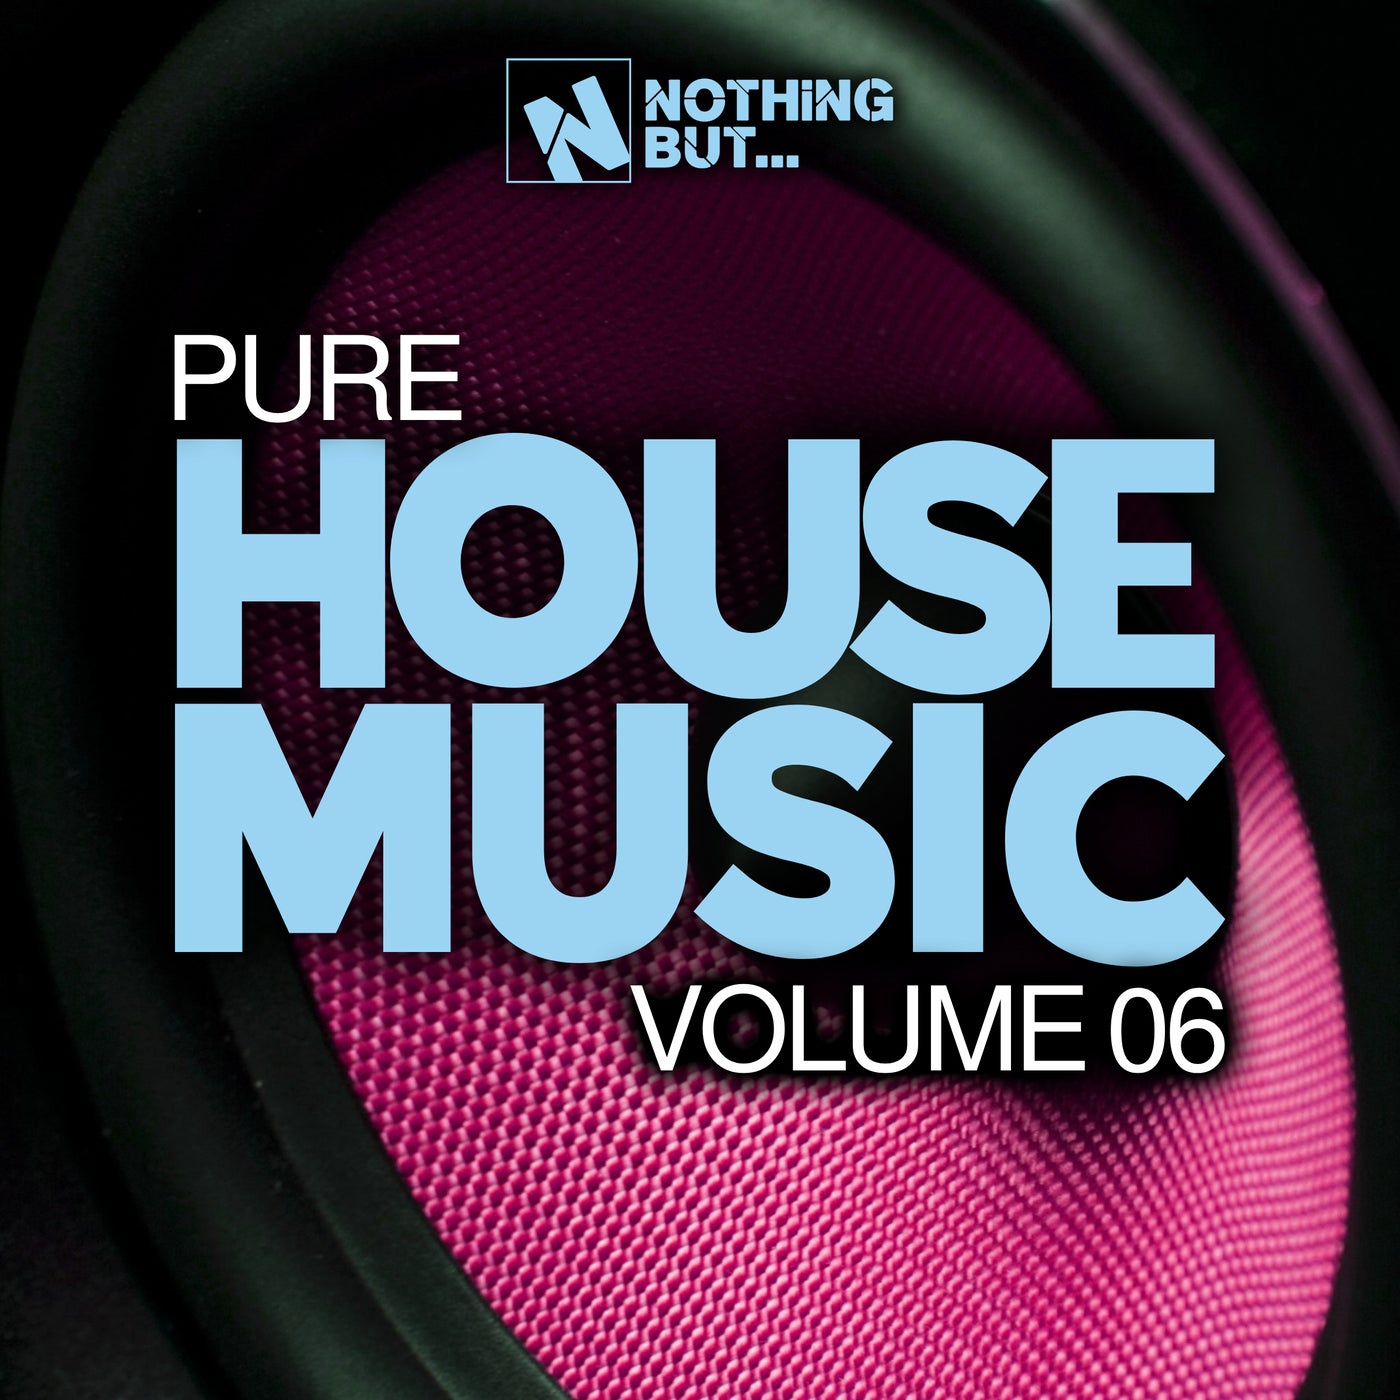 VA – Nothing But… Pure House Music, Vol. 06 [NBPHM06]